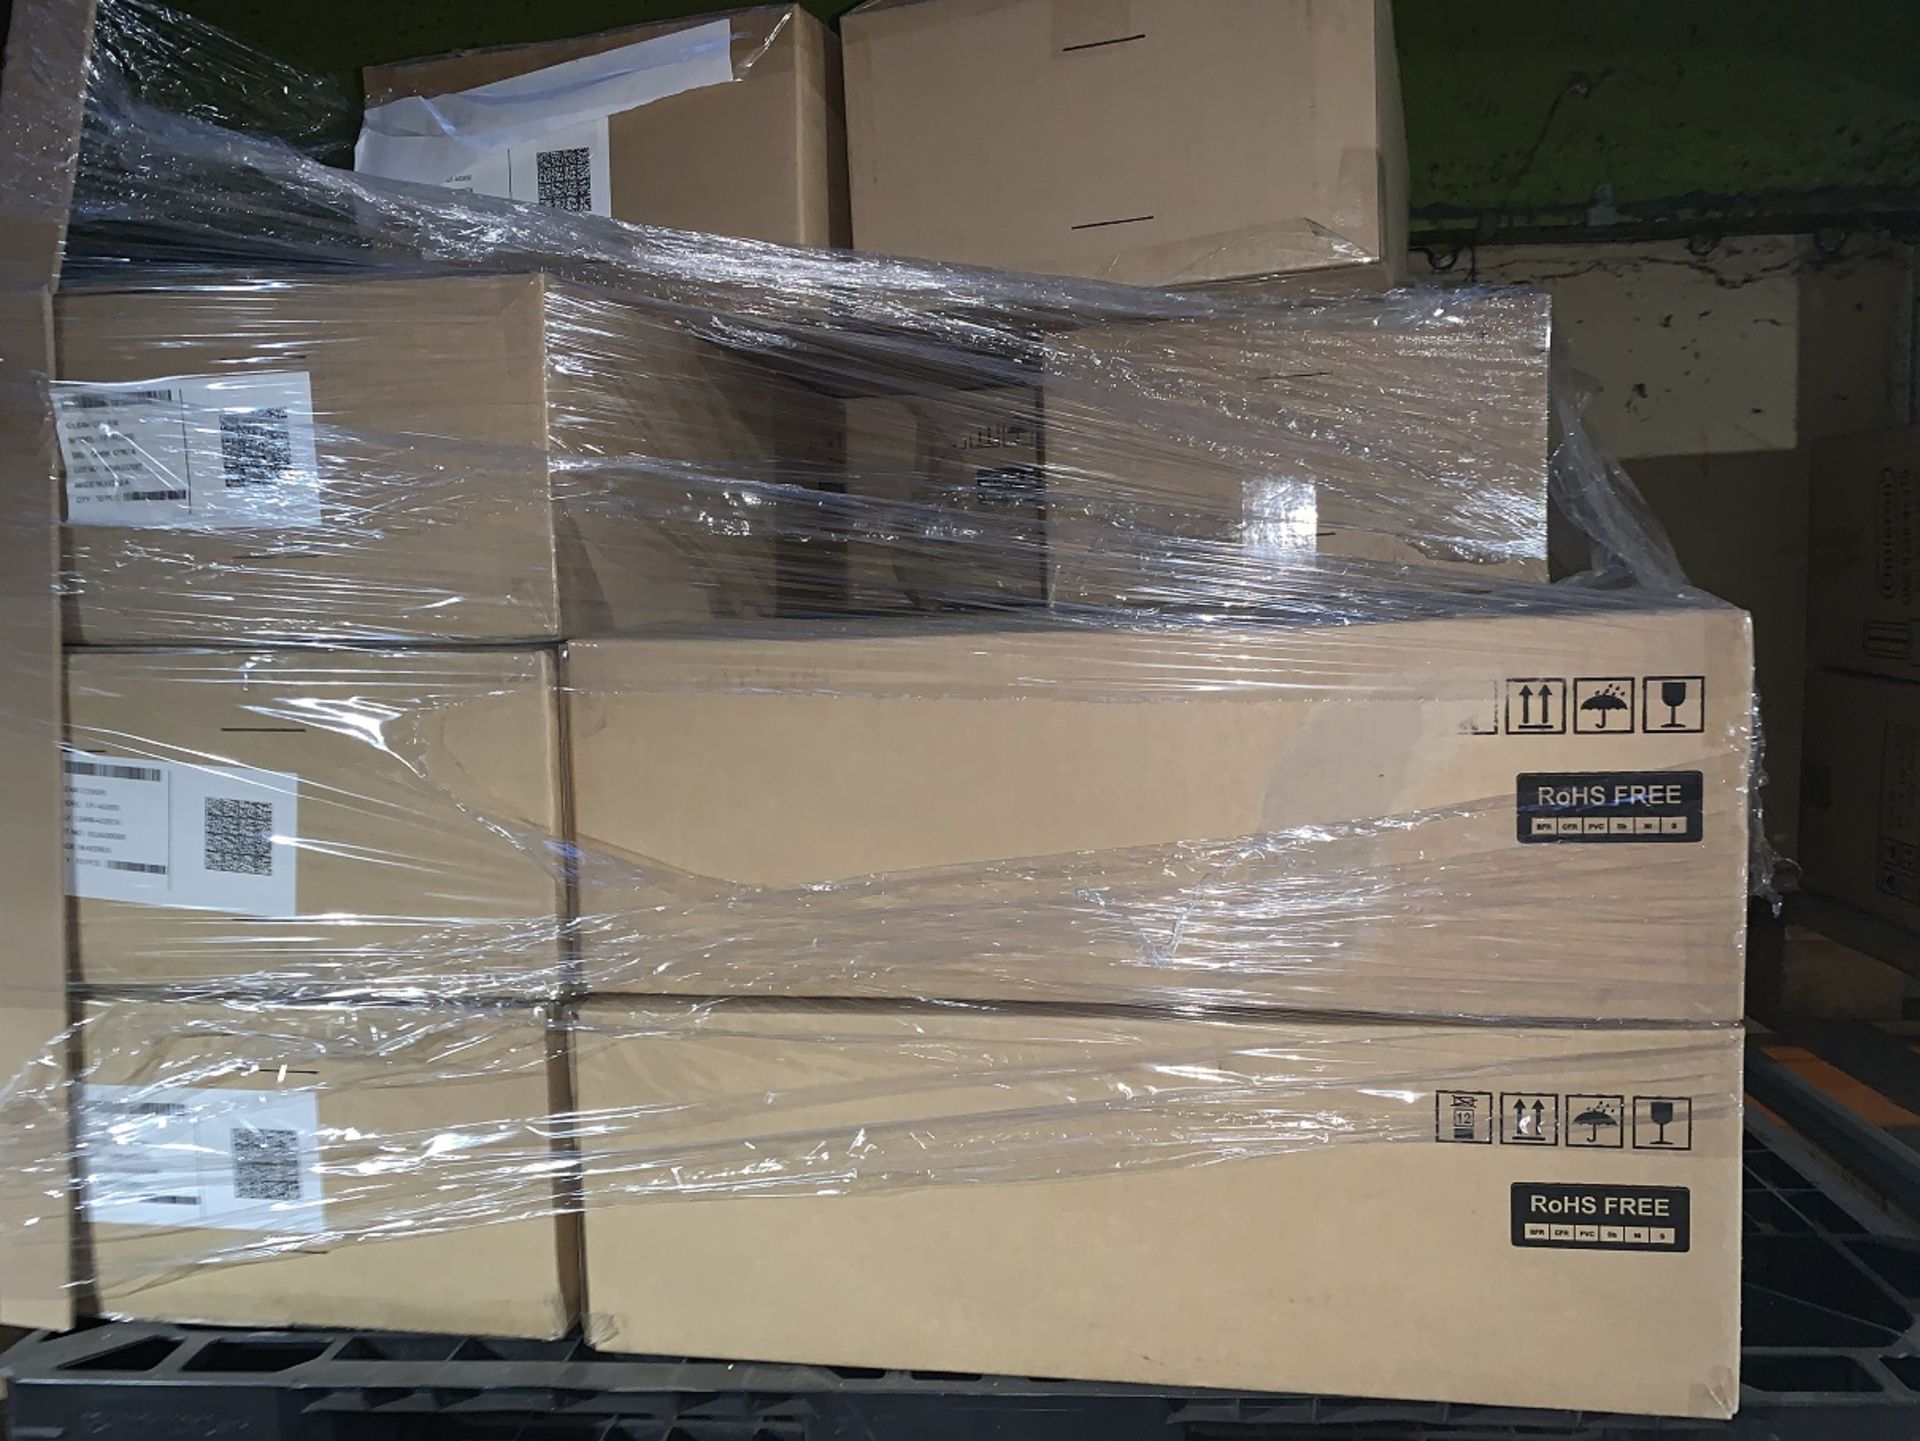 1 LOT TO CONTAIN 13 BOXES OF CLEAR SAMSUNG S6 PHONE CASES / EACH BOX CONTAINS 50 CASES (PUBLIC